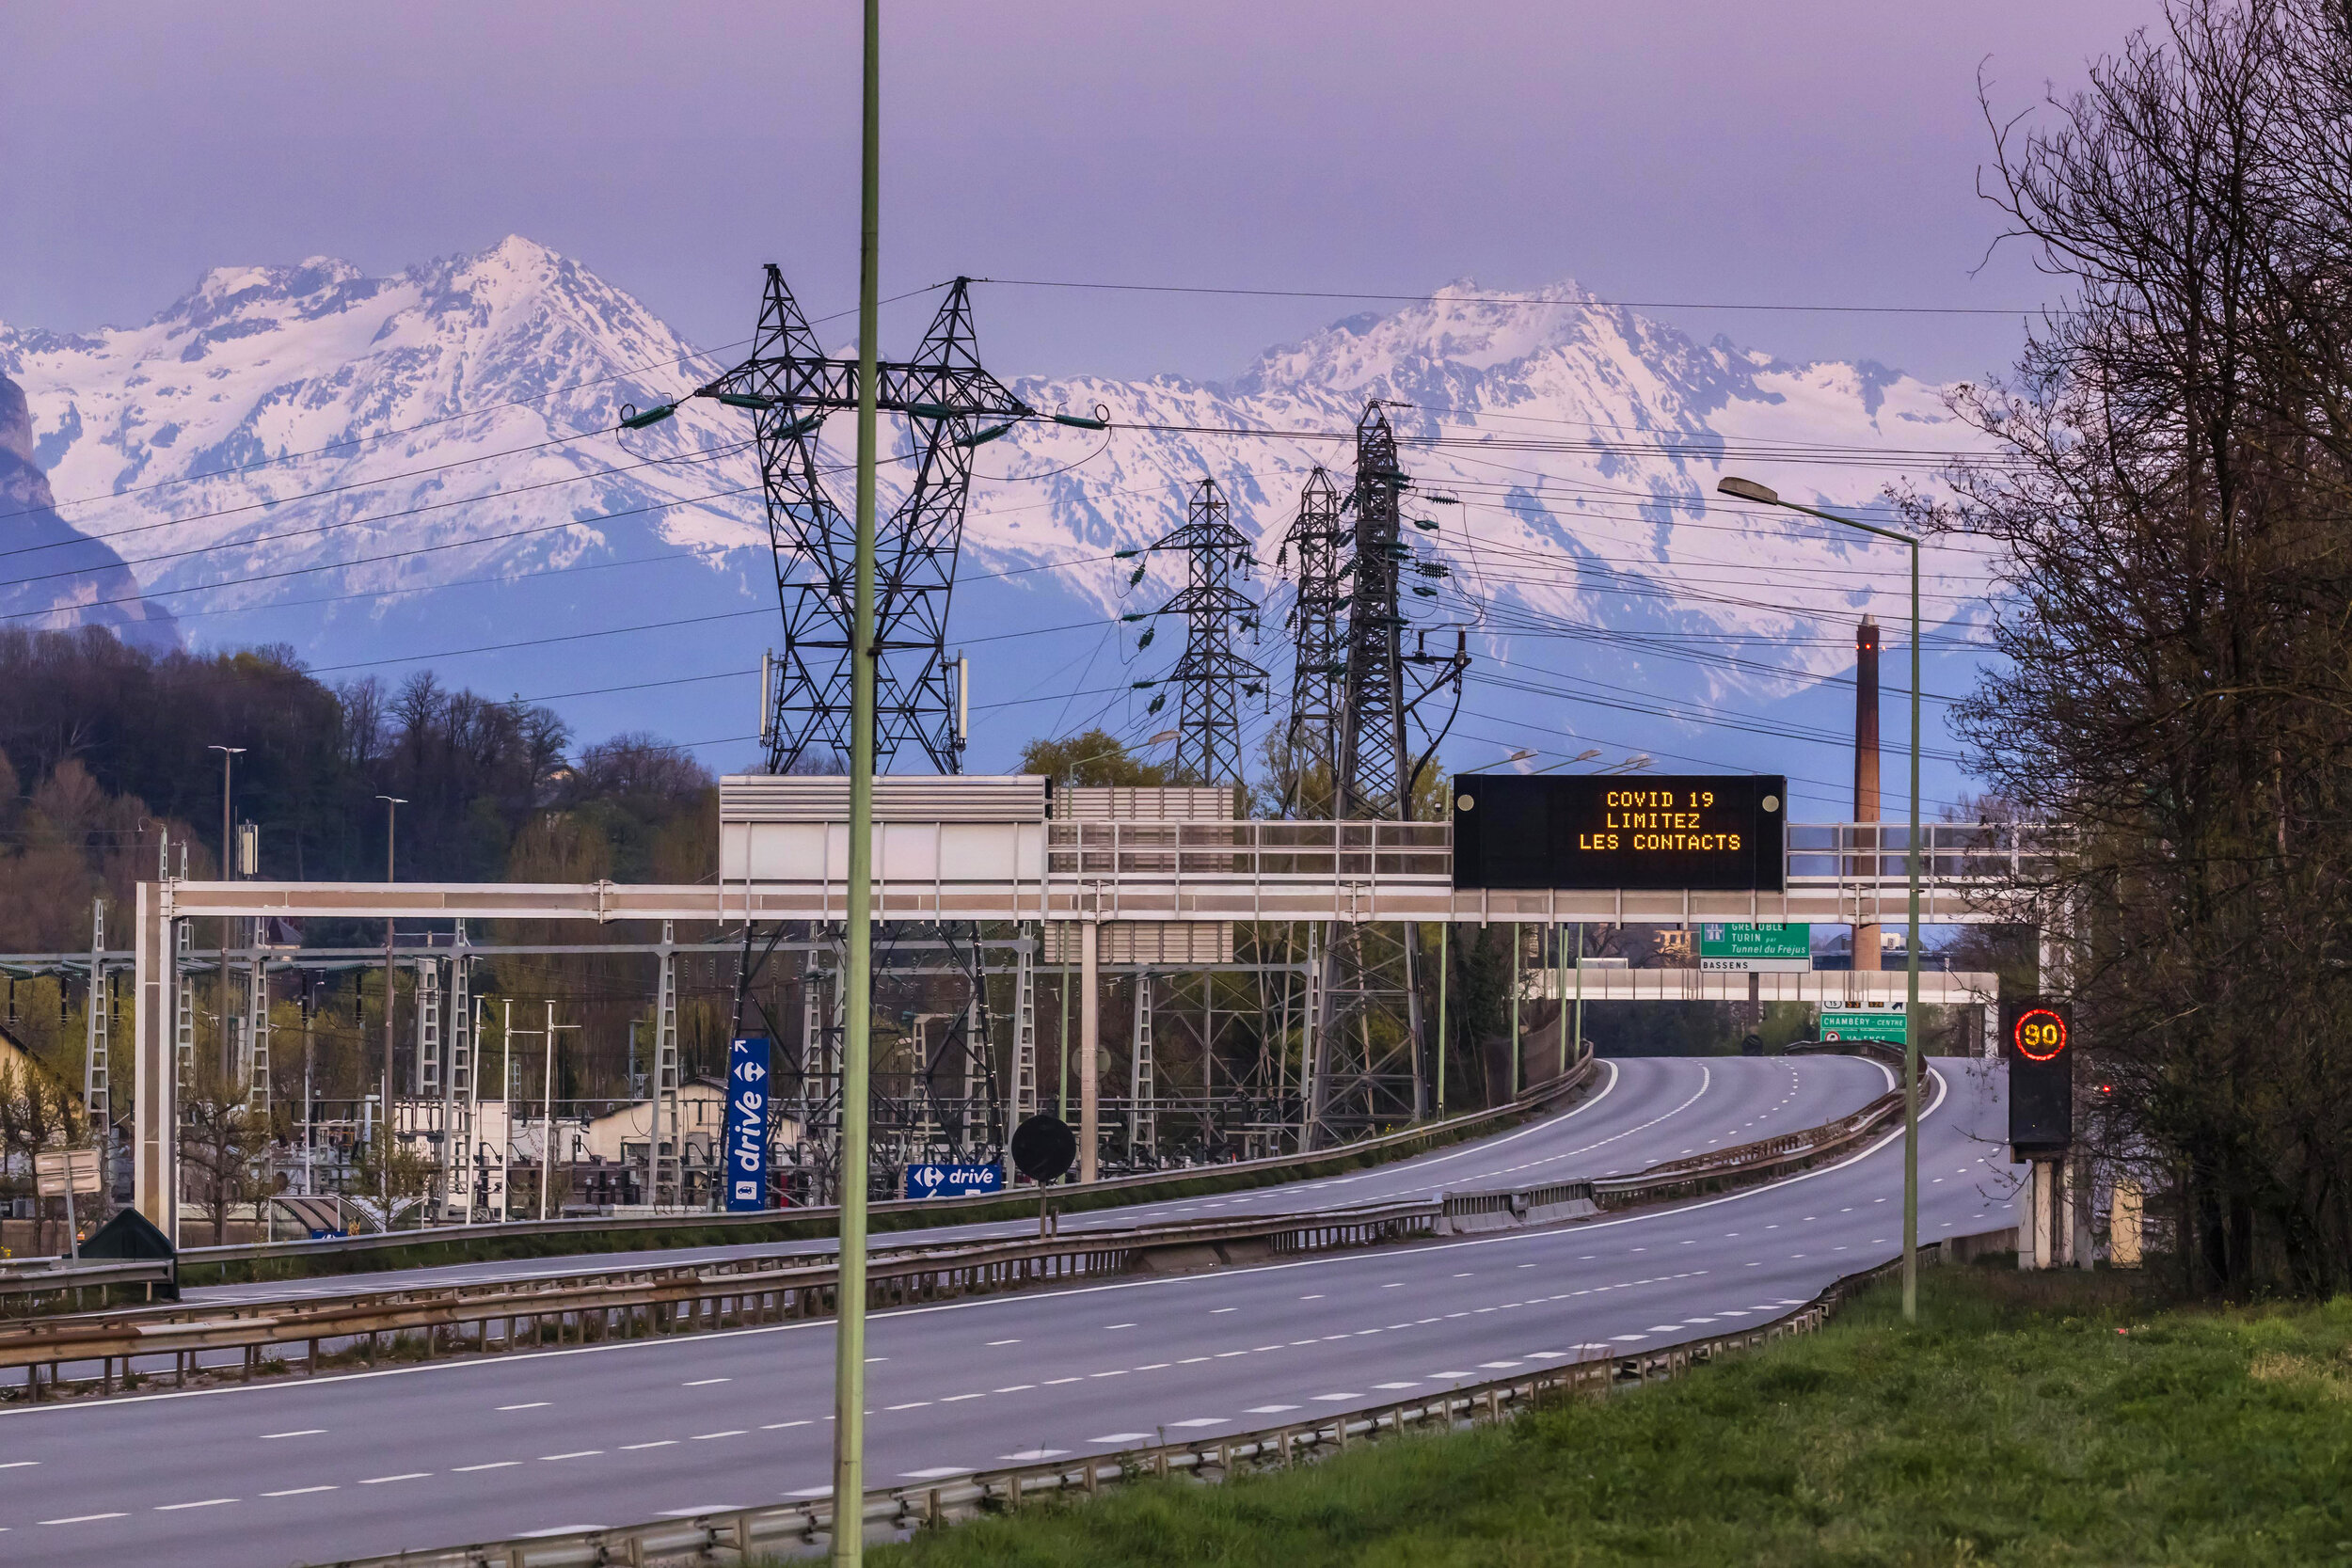   © Vincent Isoré / IP3 ; Chambery, France April 4, 2020 - An information panel reading "COVID19 limit contacts" on an empty urban expressway .  